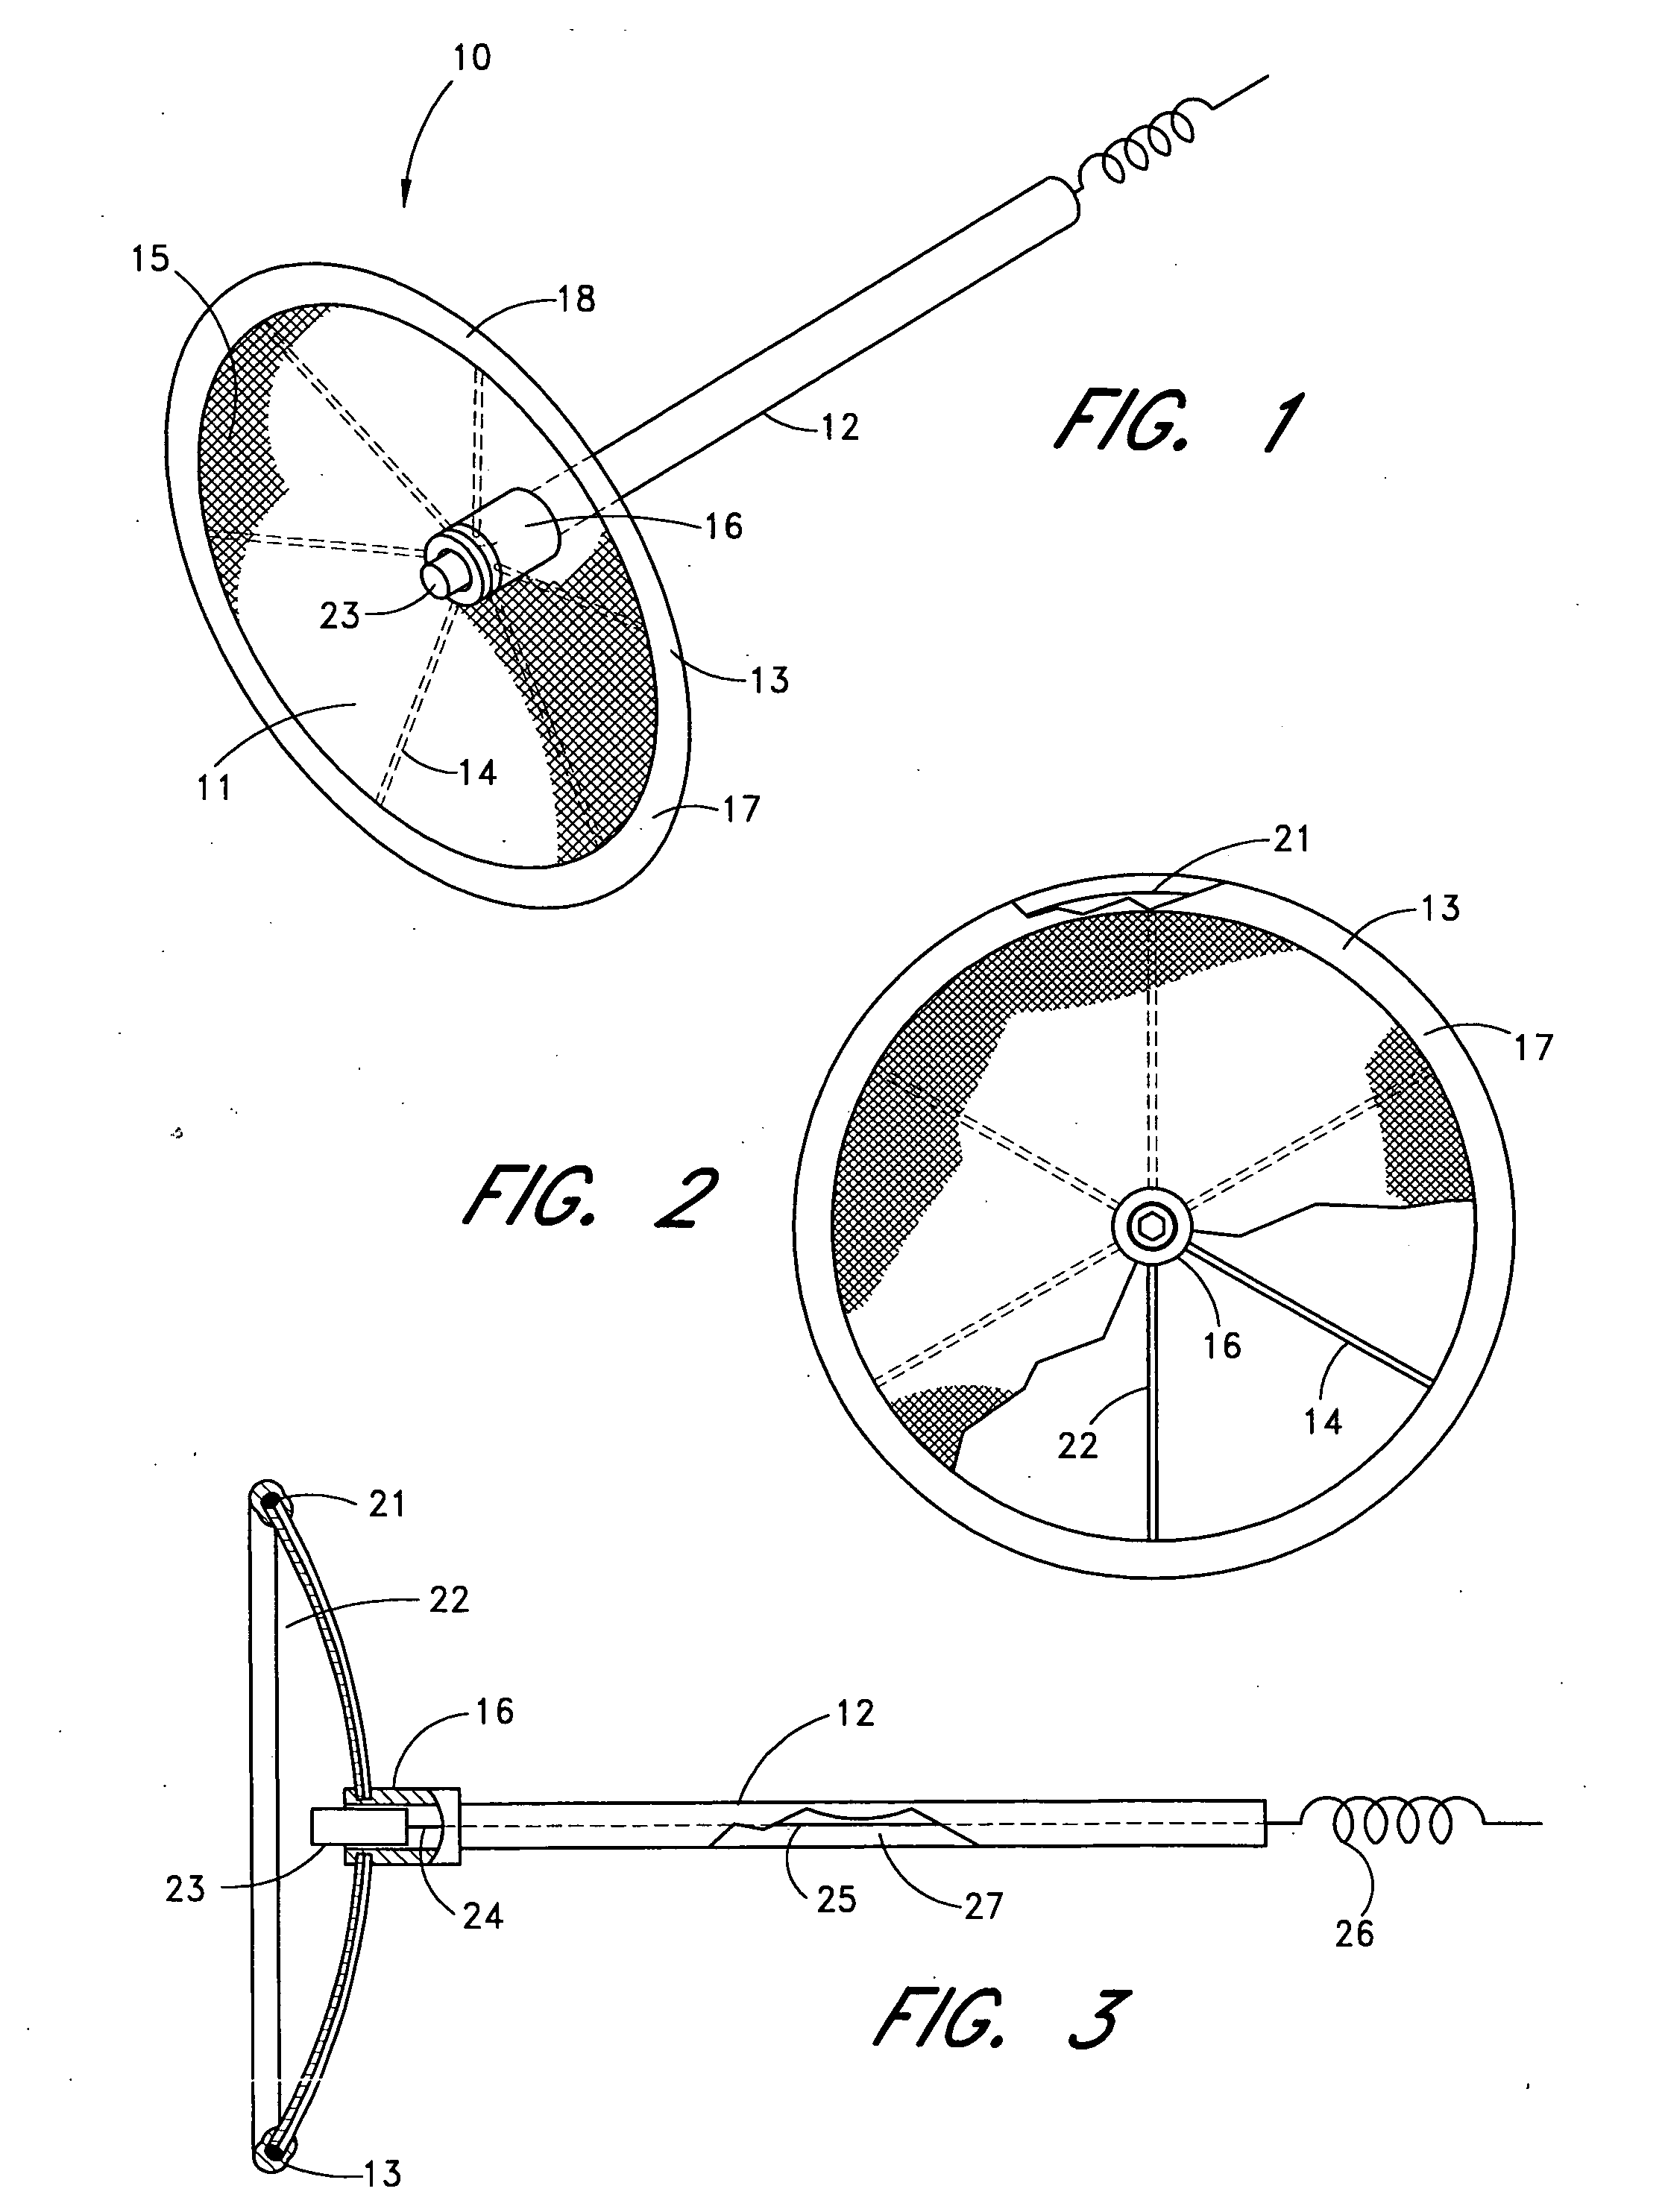 Method for left atrial appendage occlusion